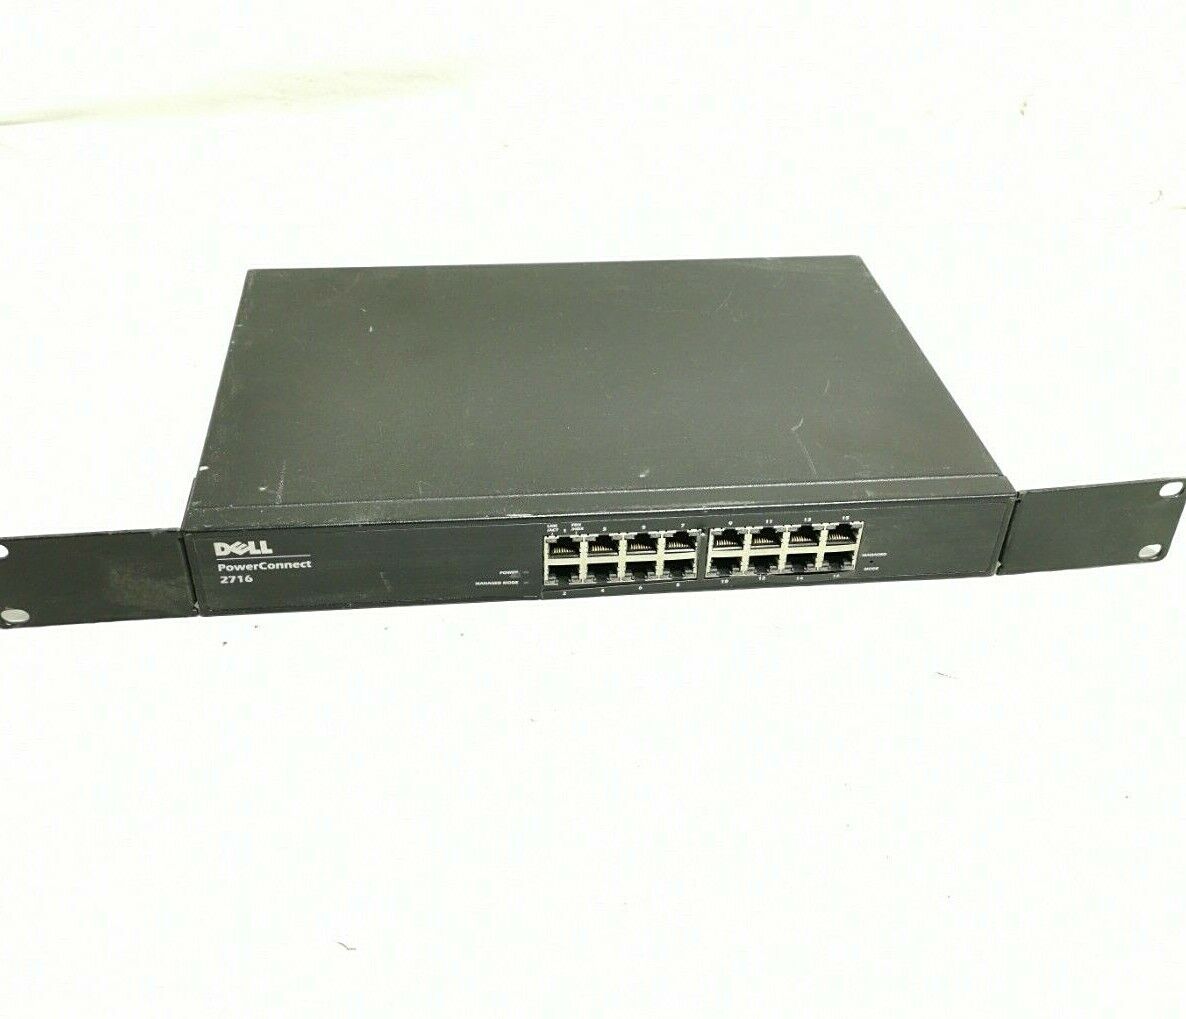 DELL POWERCONNECT 2716 100-240 V01A 16 - PORT MANAGED SWITCH 